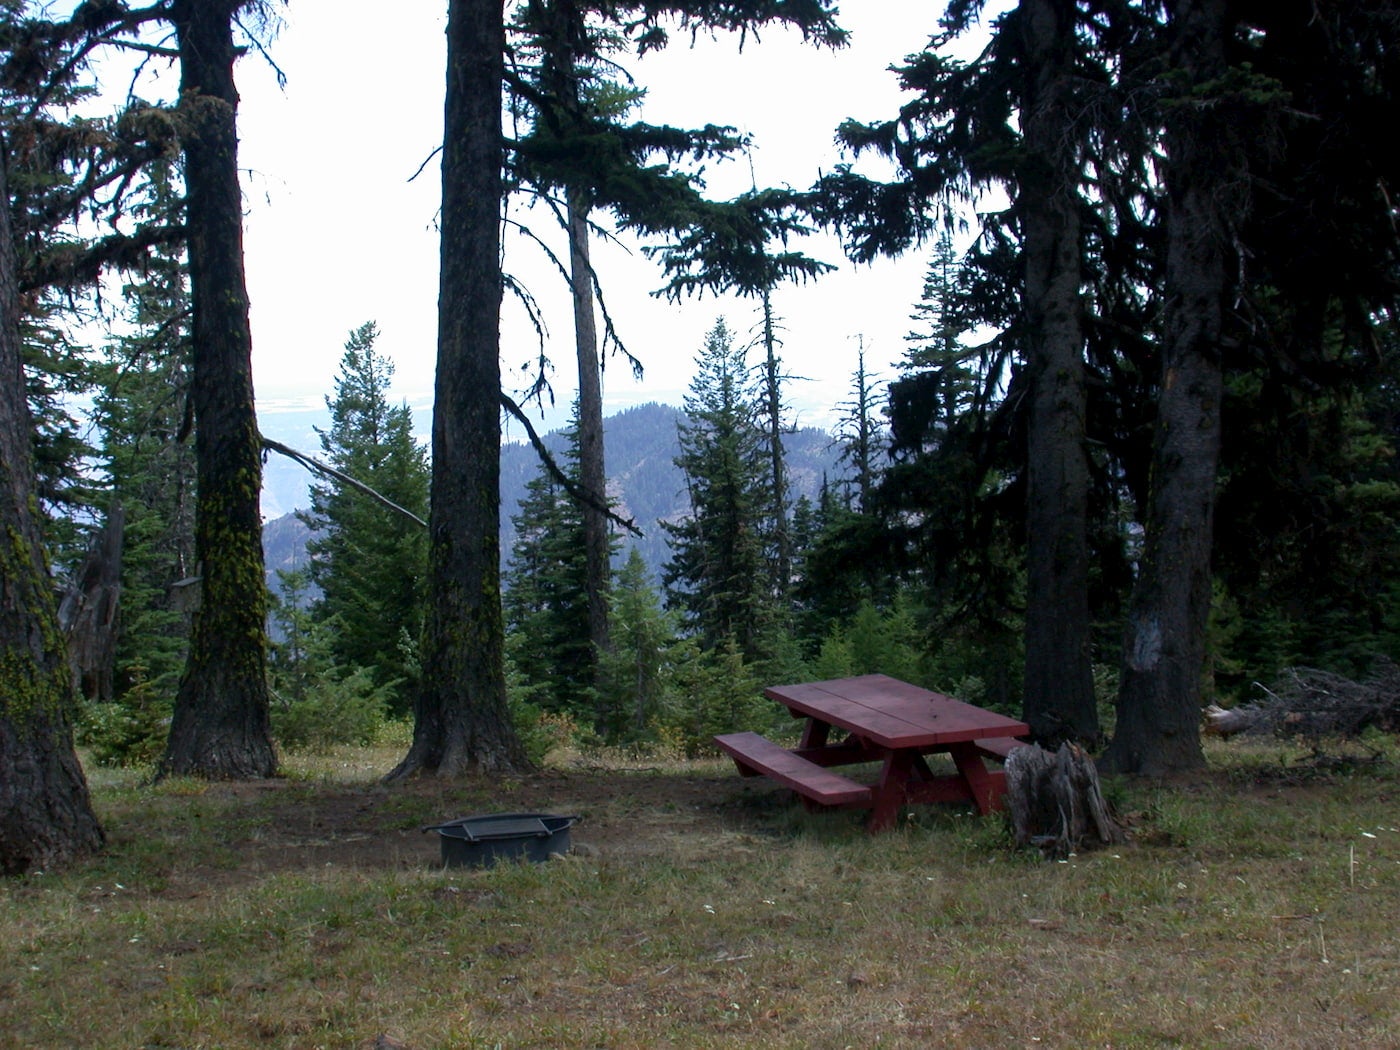 Picnic table and fire pit campsite overlooking hills.